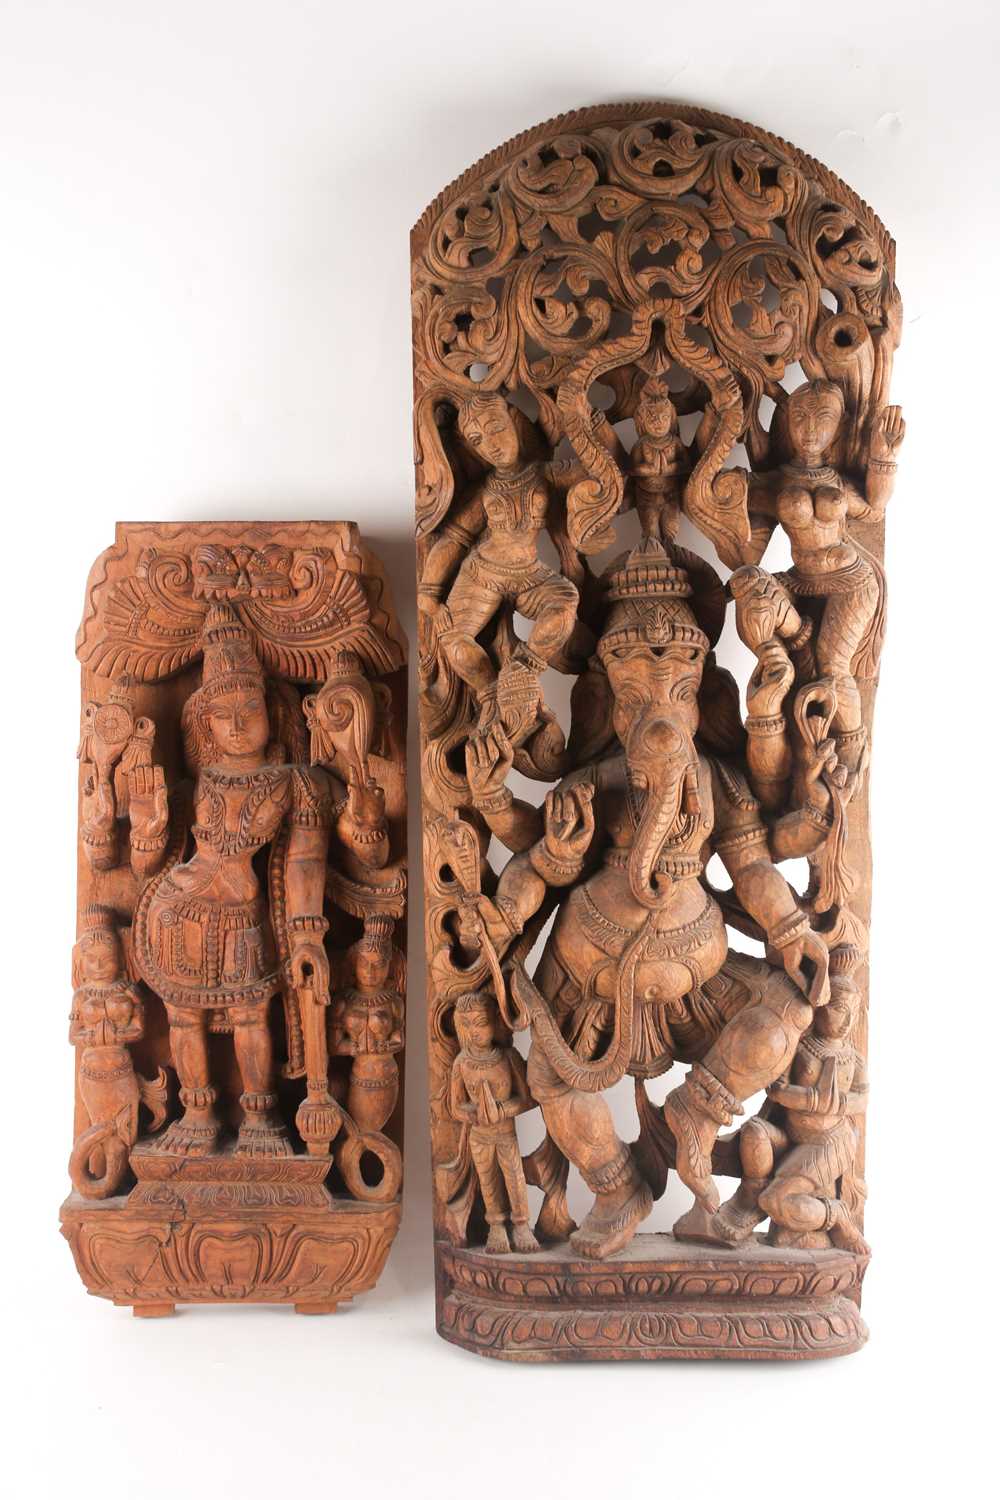 An Indian teak wood arched architectural panel, carved and pierced with Lord Ganesh and attendants